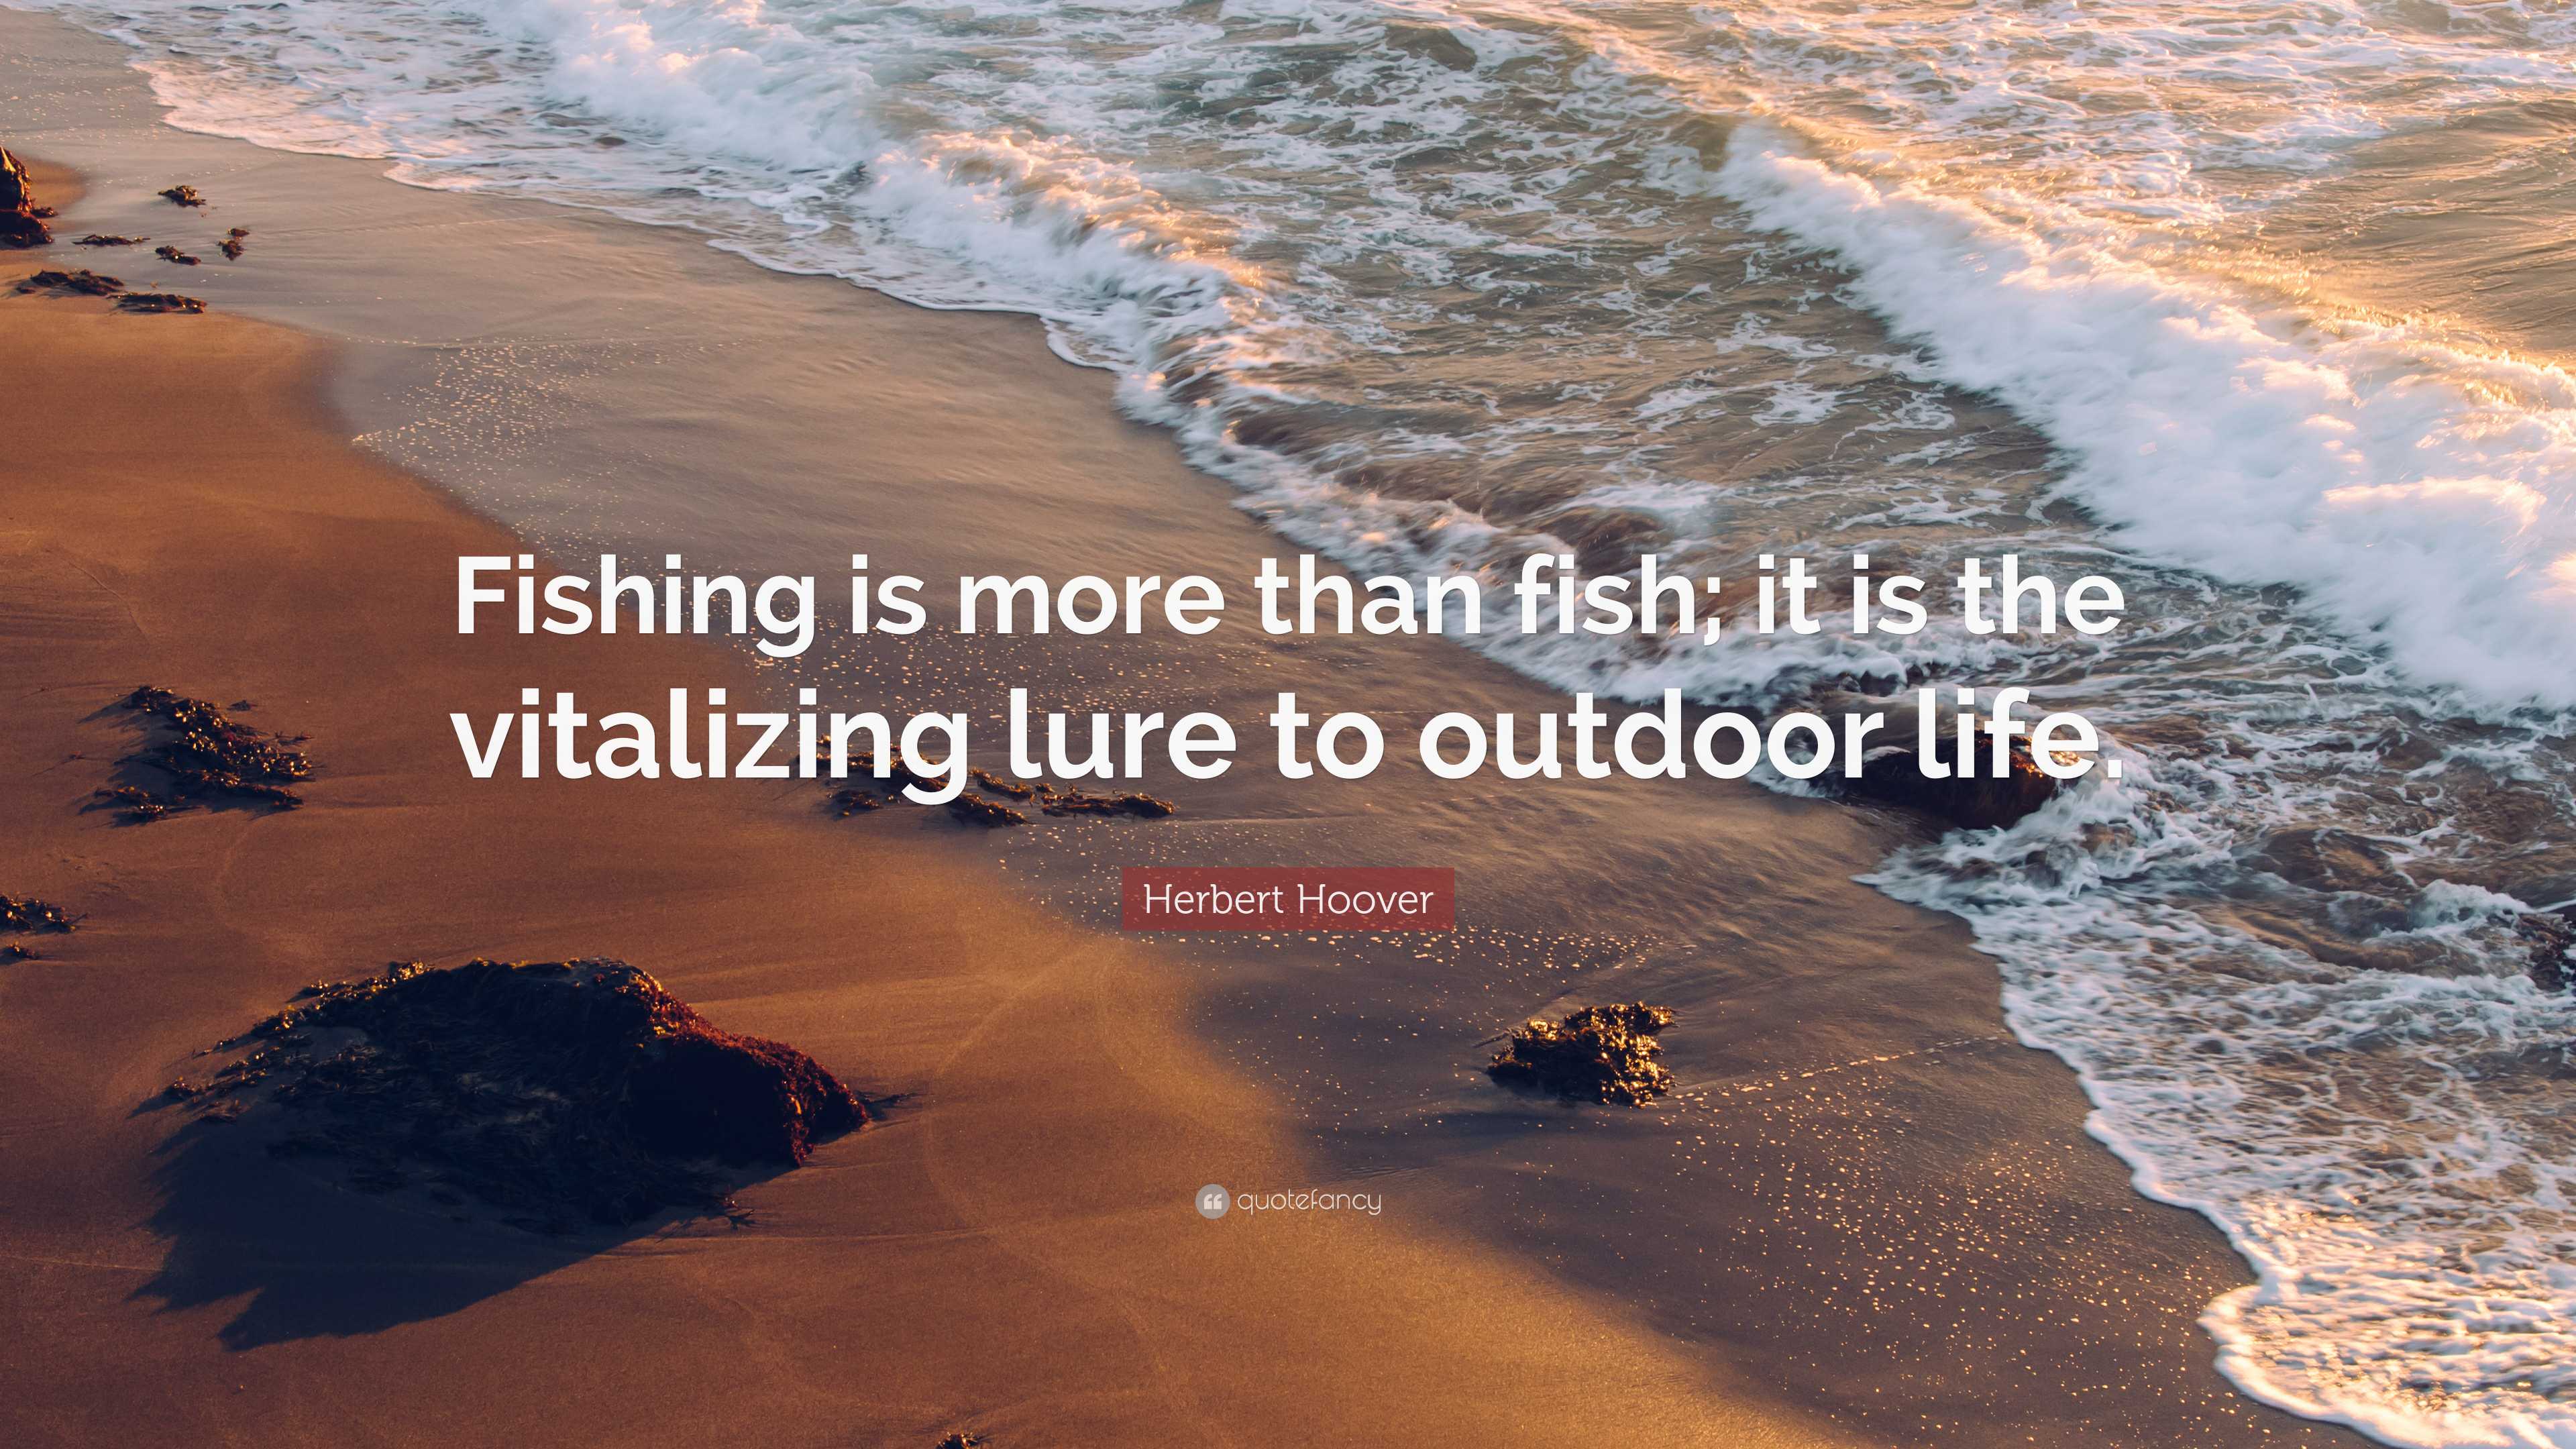 Top 100 Quotes About Lure: Famous Quotes & Sayings About Lure